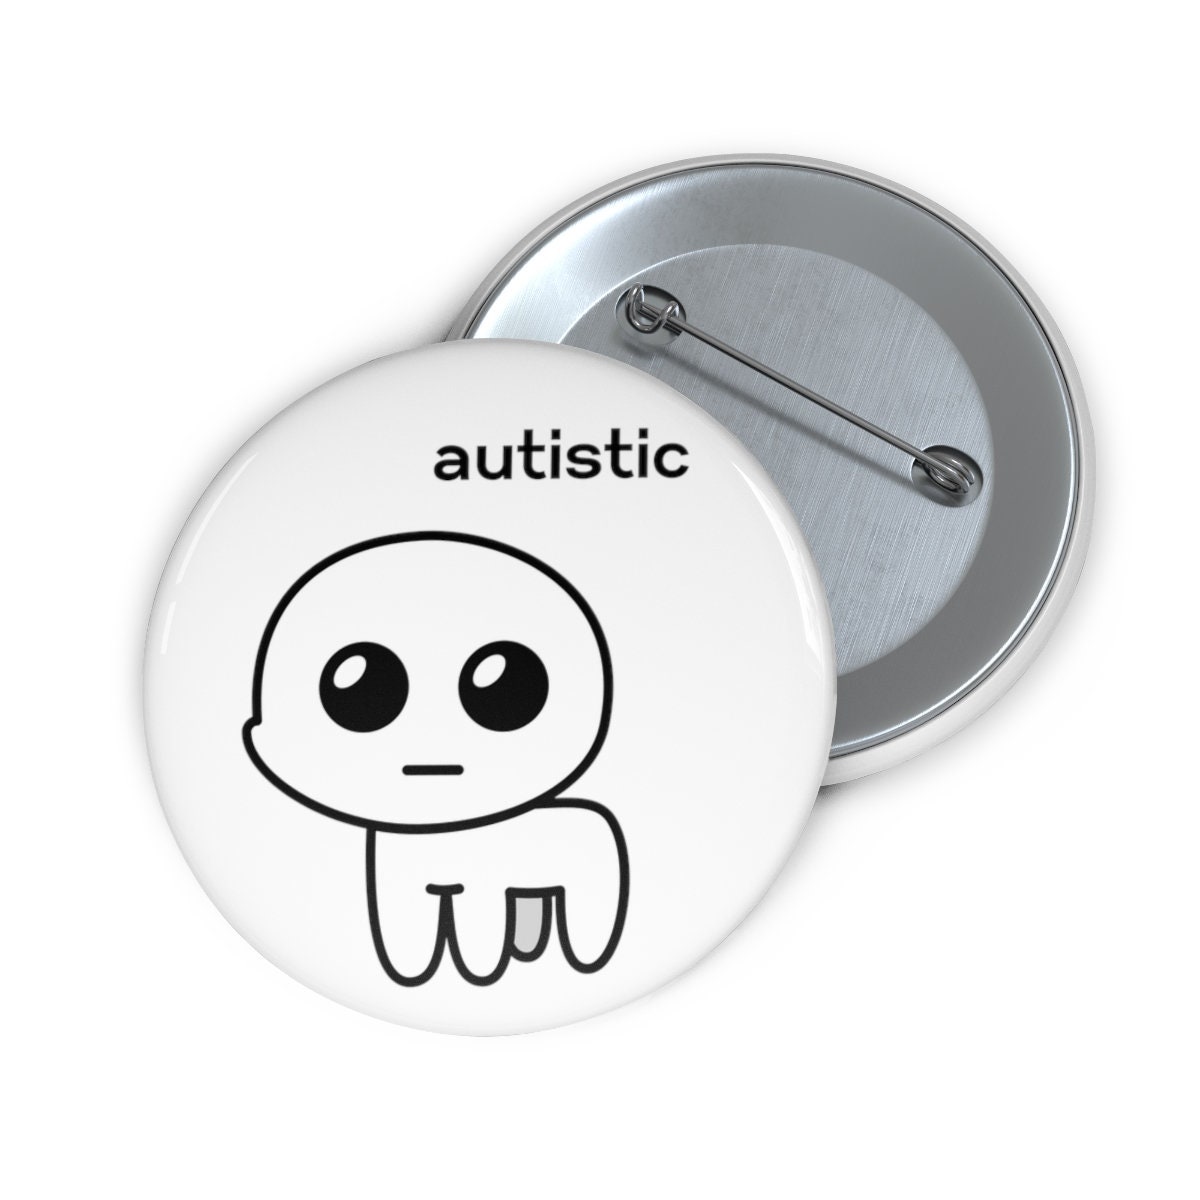 To Be Honest Tbh Creature Meme Pin Badge, Autism Autistic Pin For